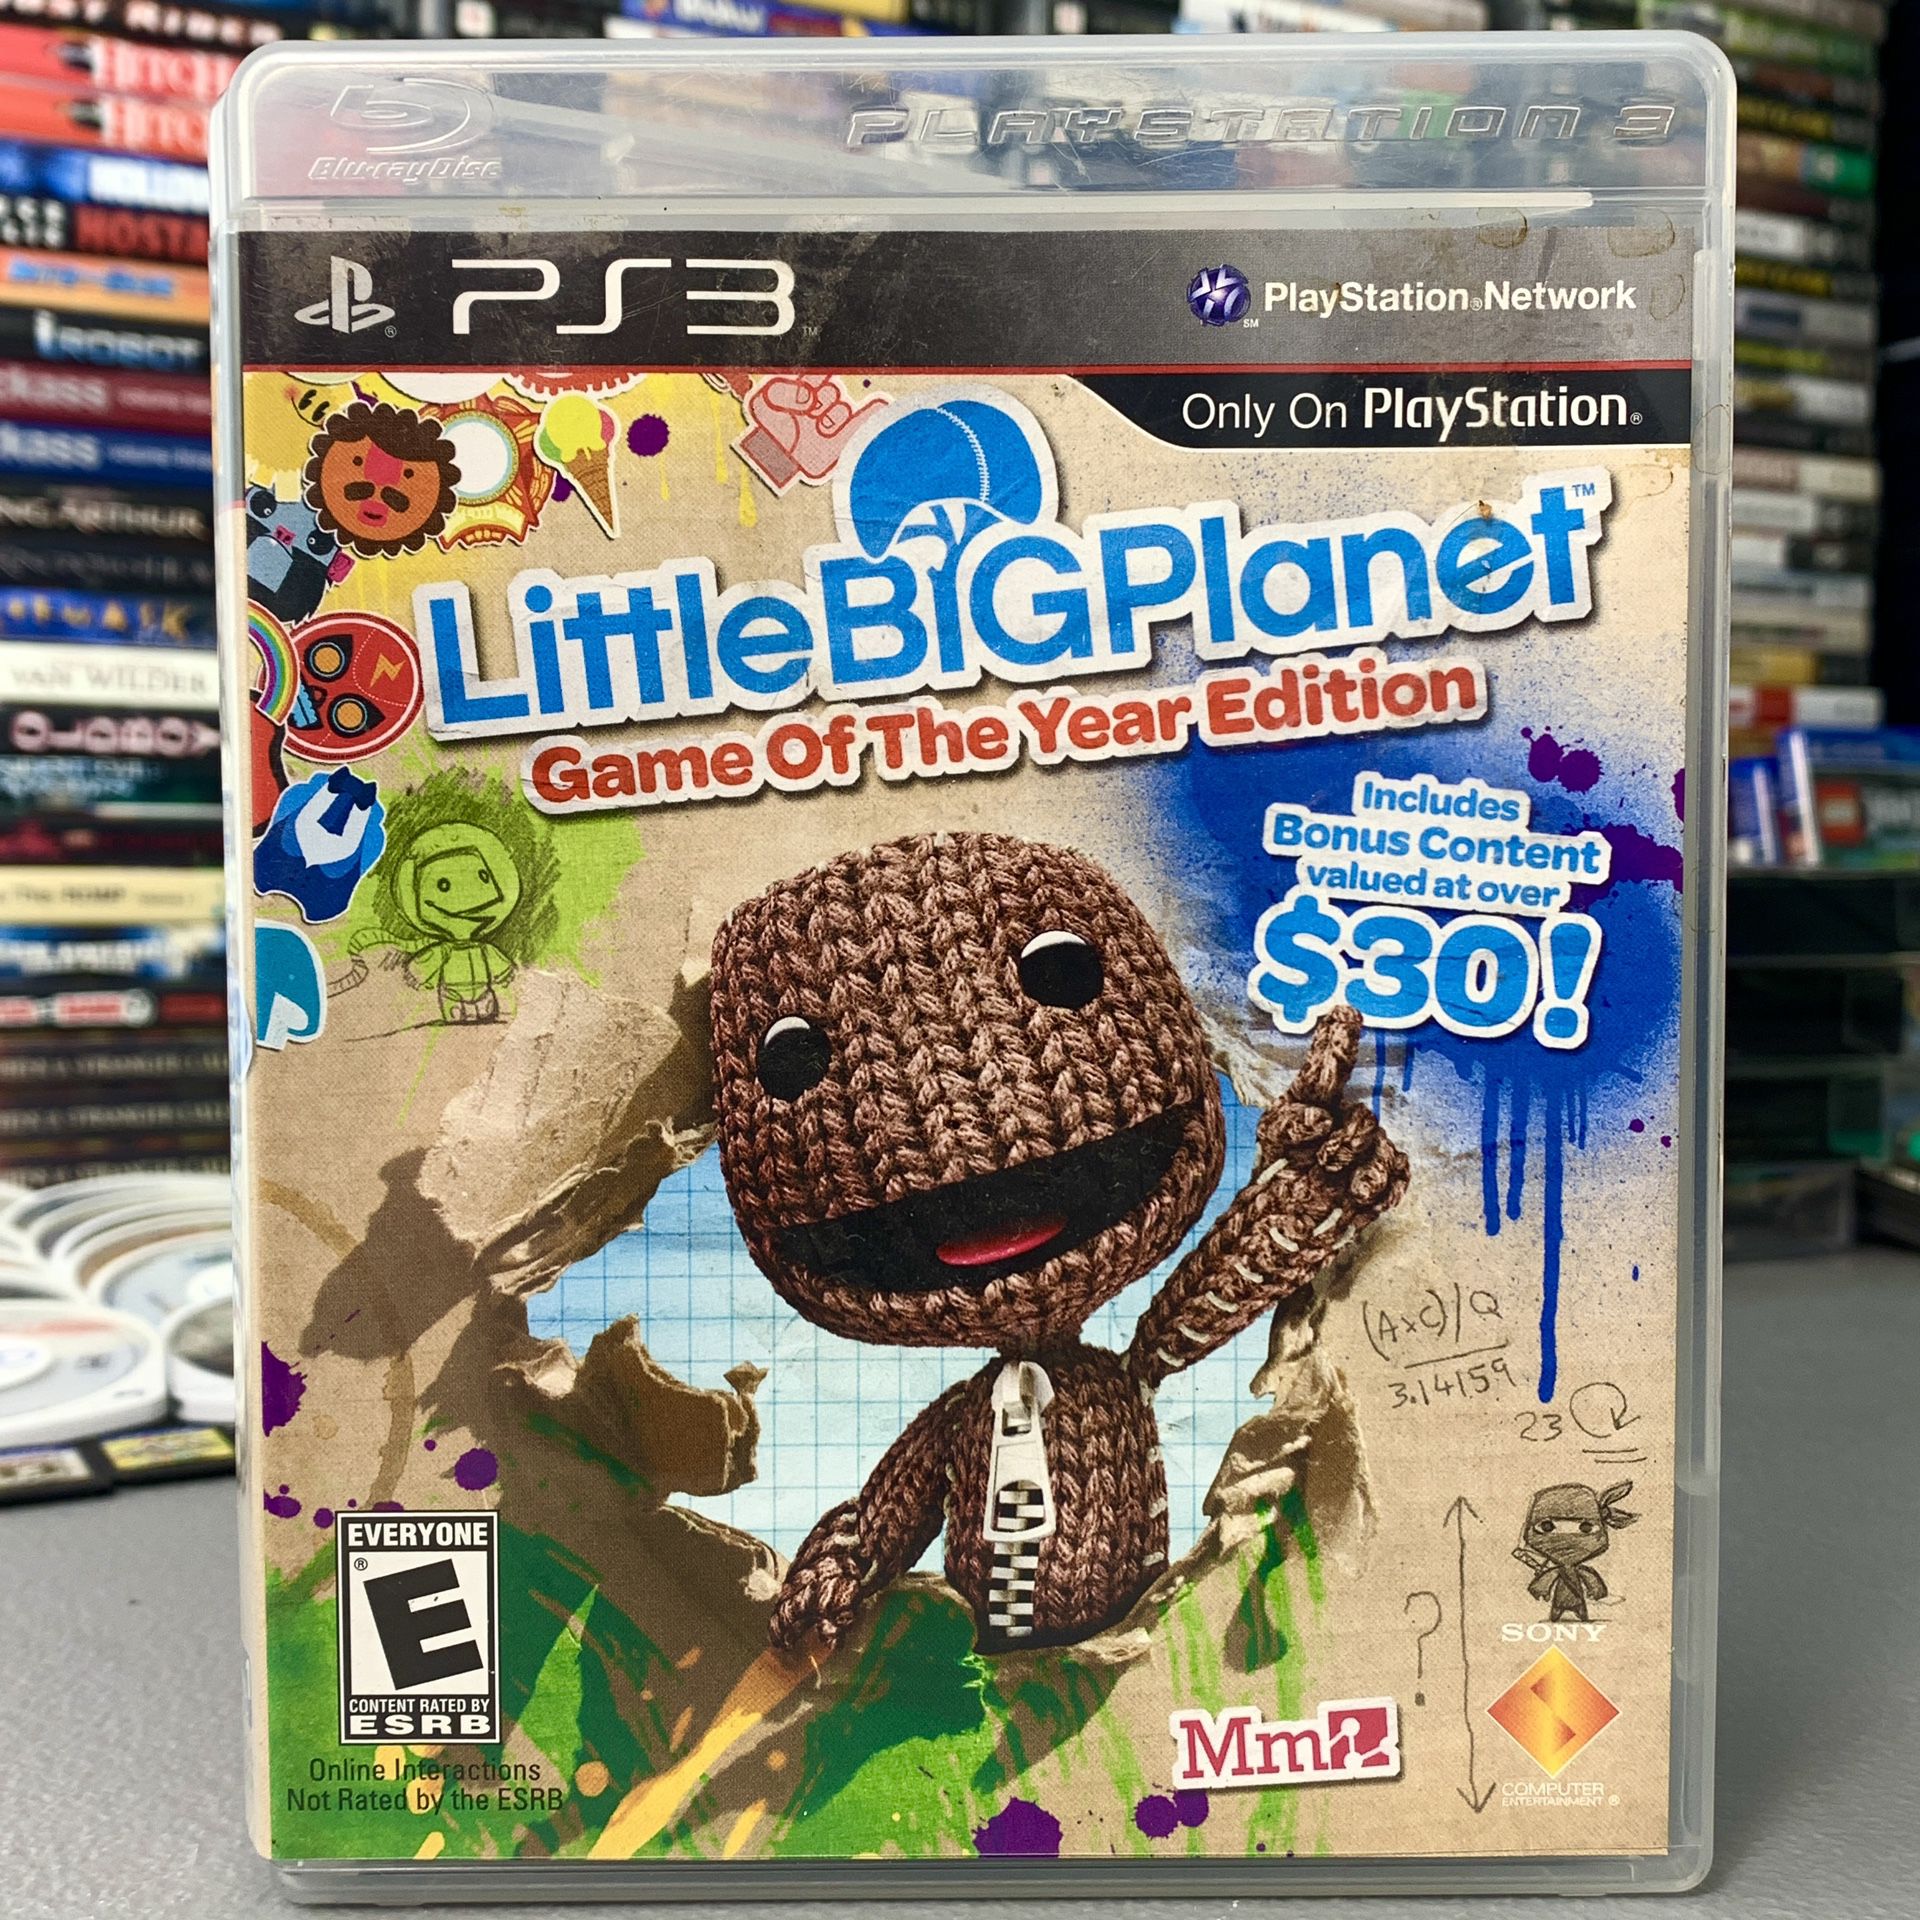 LittleBigPlanet -- Game of the Year Edition (Sony PlayStation 3, 2009)  *TRADE IN YOUR OLD GAMES/TCG/COMICS/PHONES/VHS FOR CSH OR CREDIT HERE*